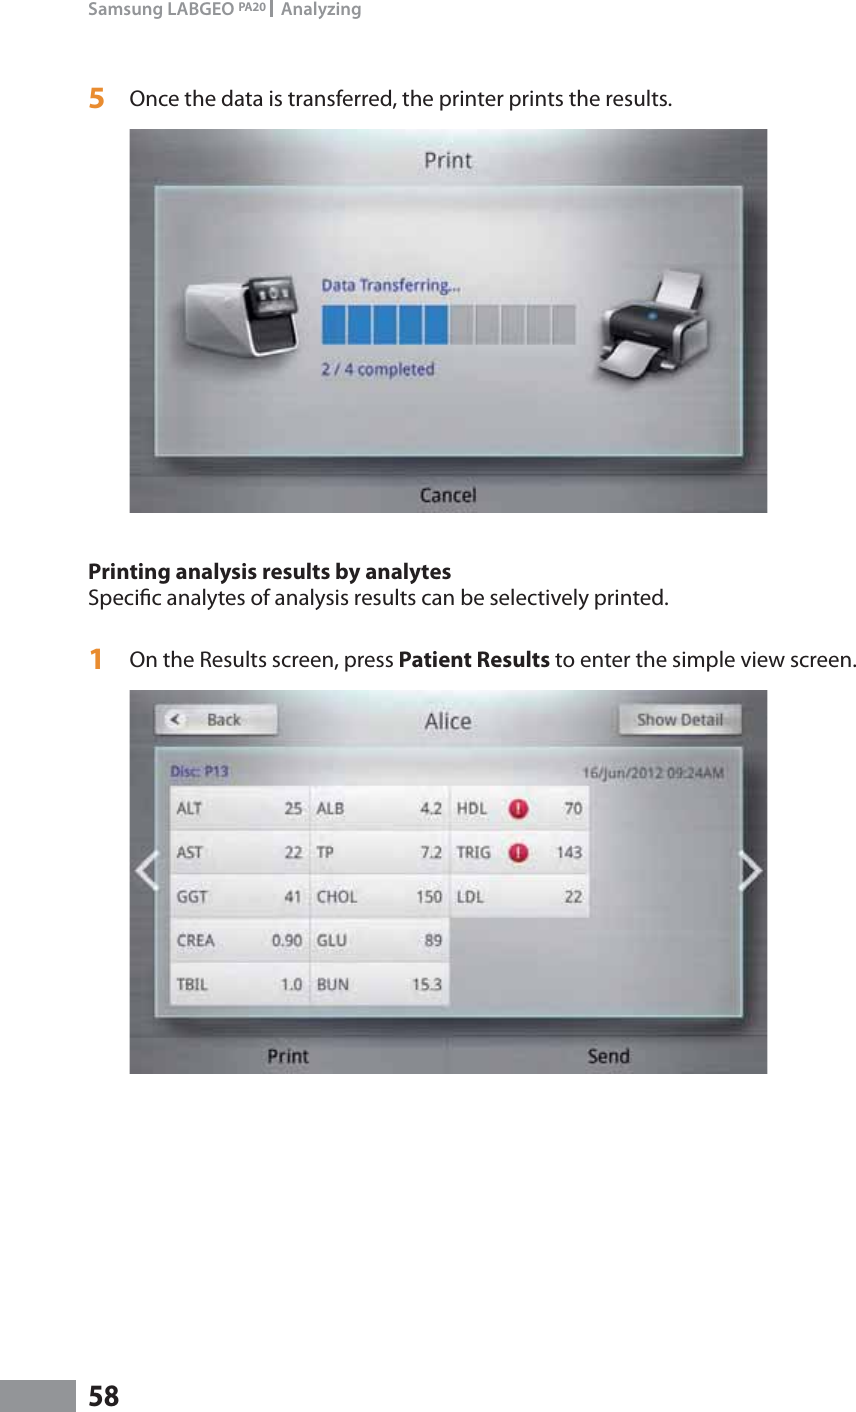 58Samsung LABGEO PA20   Analyzing5  Once the data is transferred, the printer prints the results.Printing analysis results by analytes Specic analytes of analysis results can be selectively printed.1  On the Results screen, press Patient Results to enter the simple view screen.